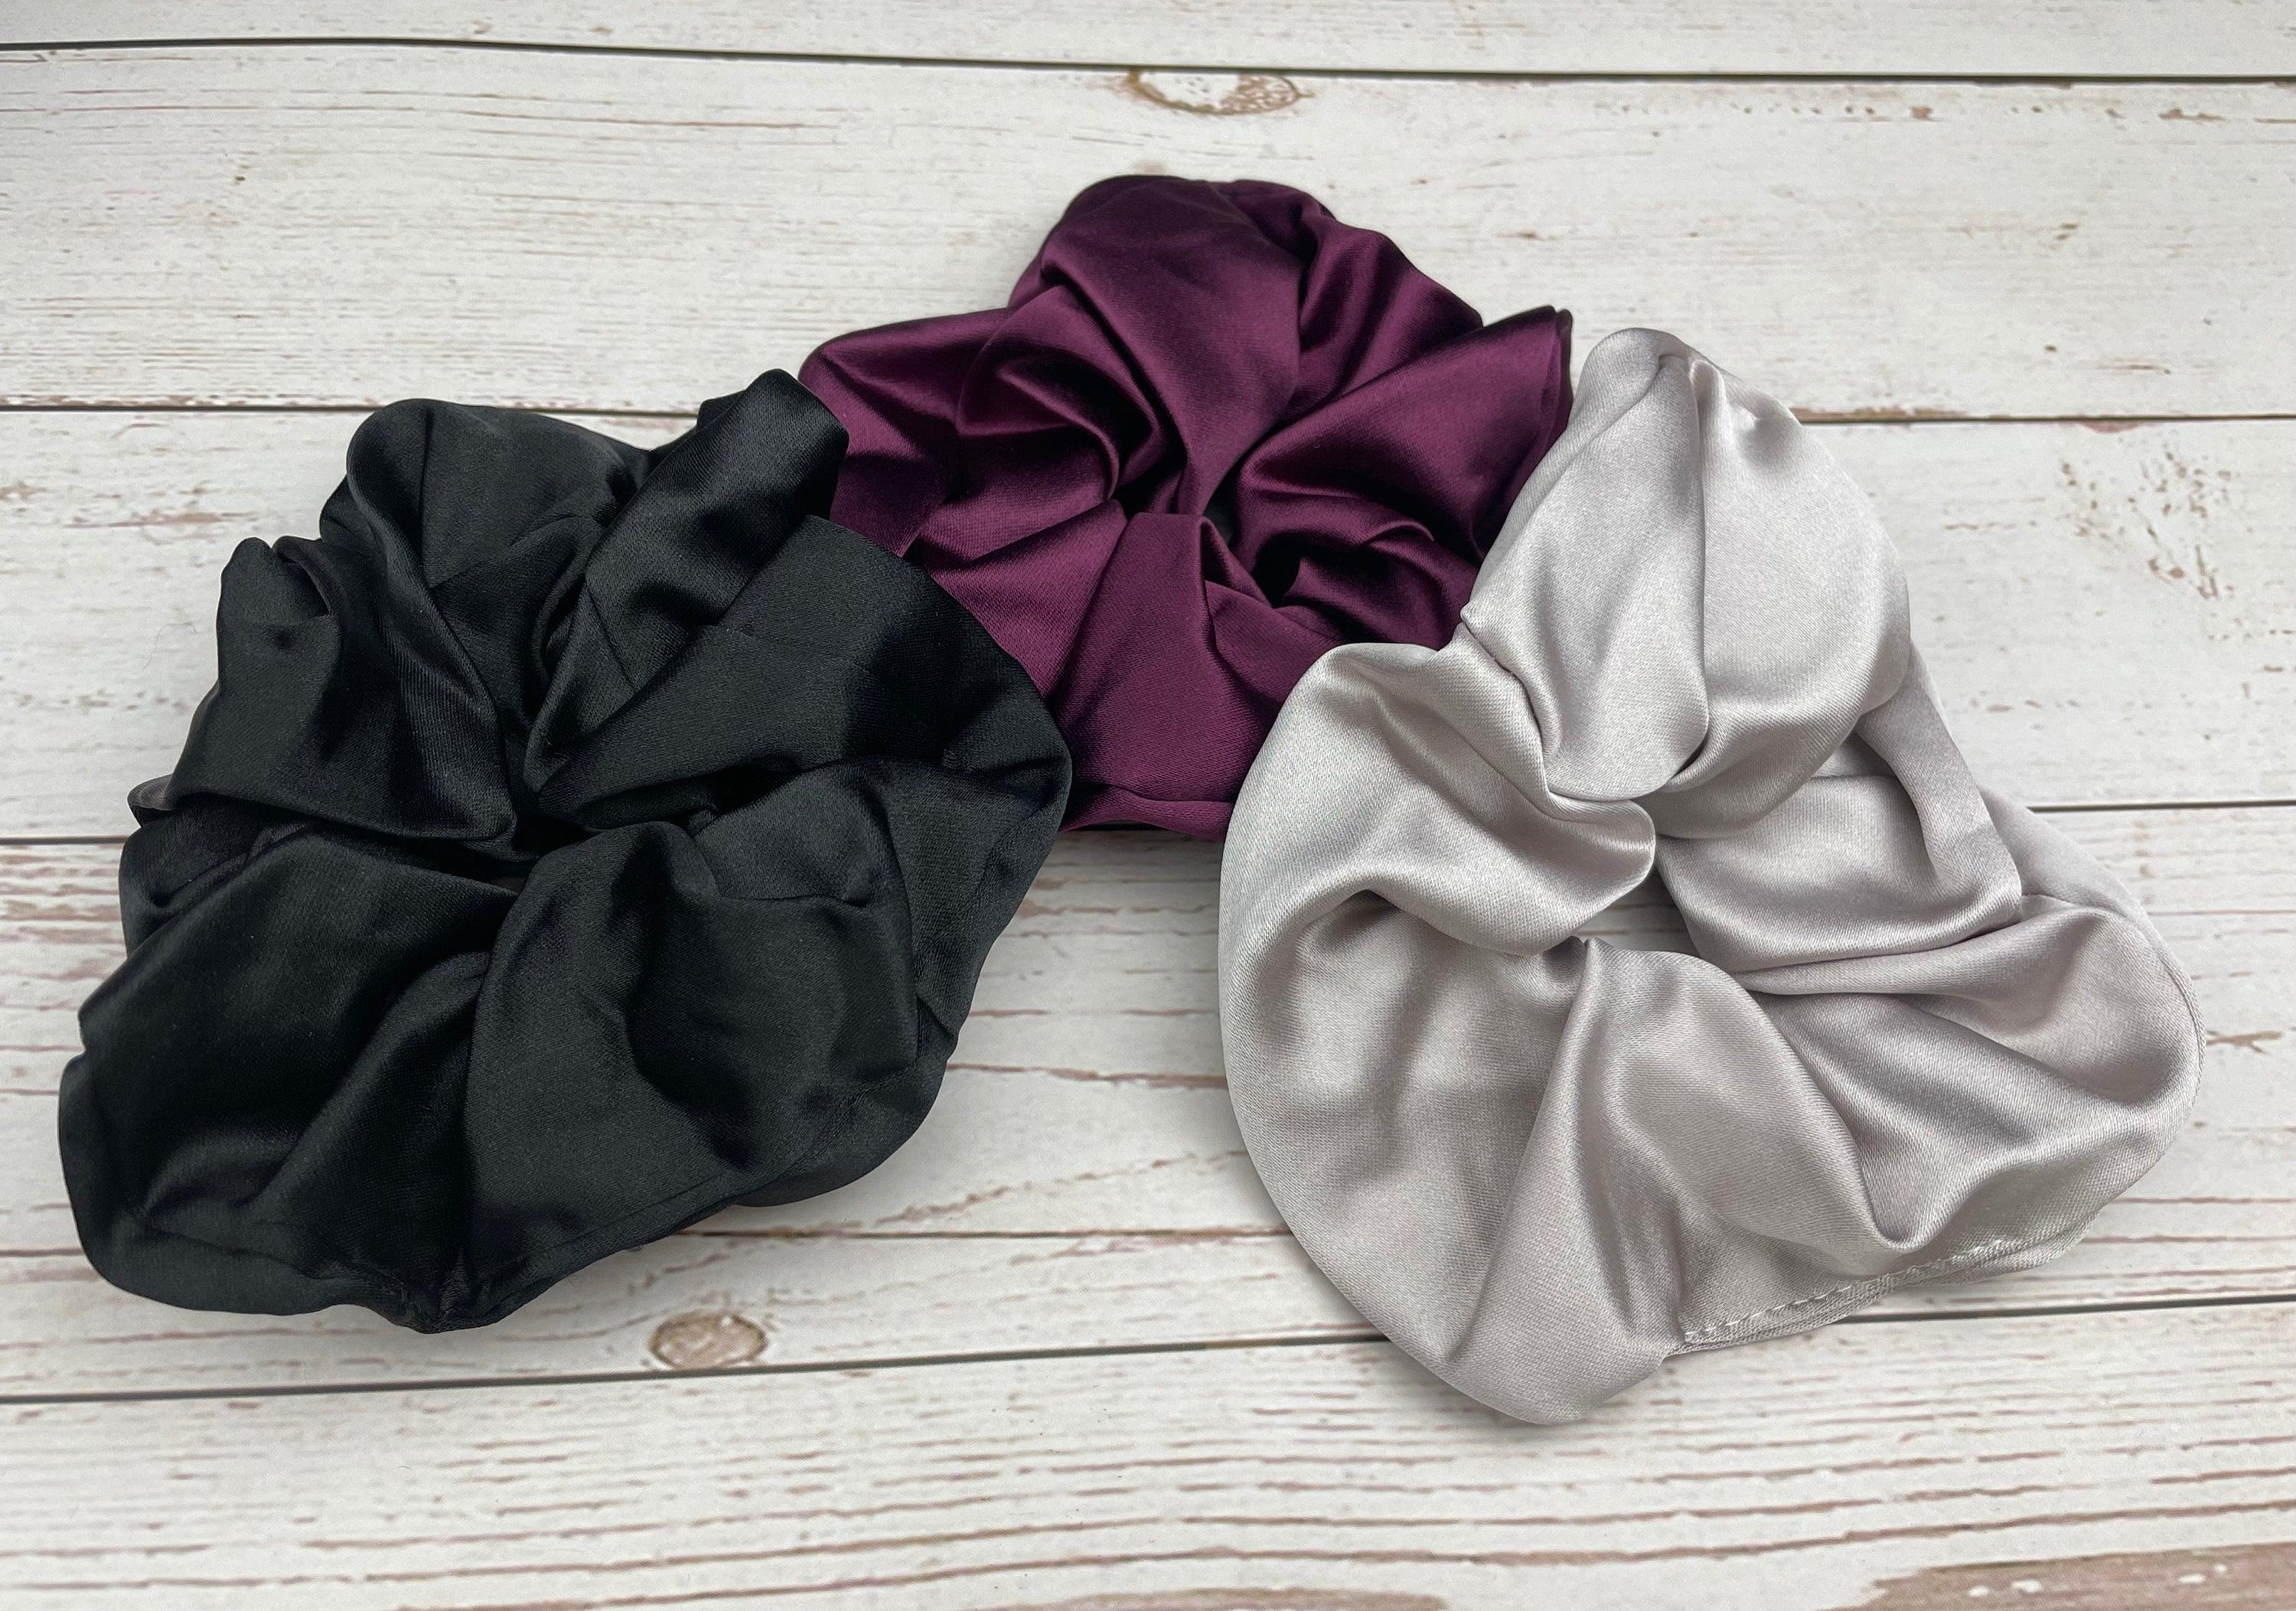  High-quality Handmade Satin Scrunchie With Bow